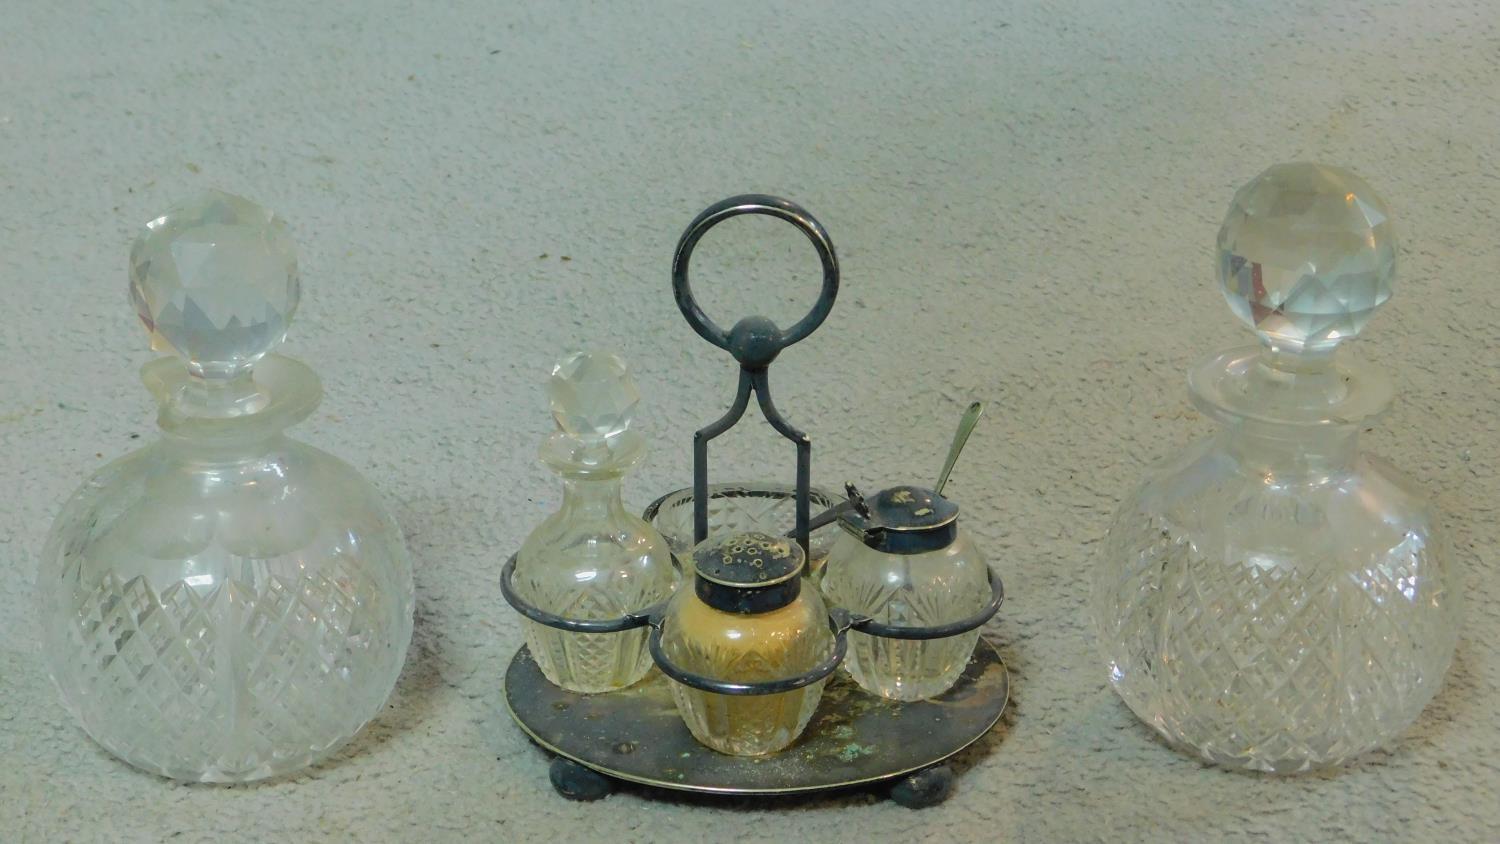 A collection of cut glass items. Including two antique diamond cut crystal perfume bottles with